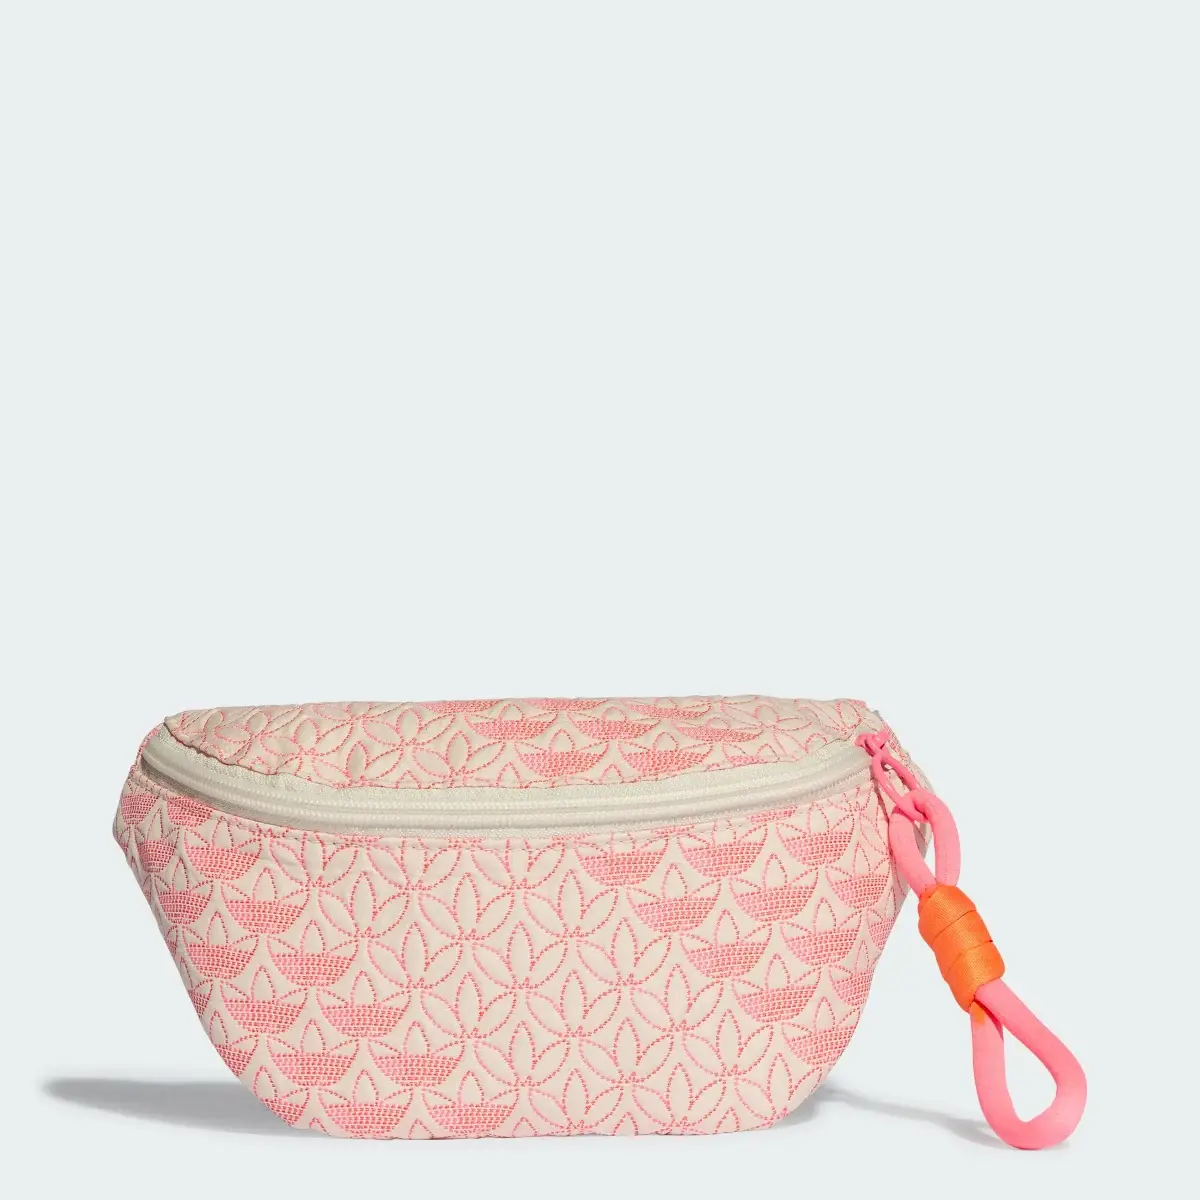 Adidas Quilted Trefoil Waist Bag. 1